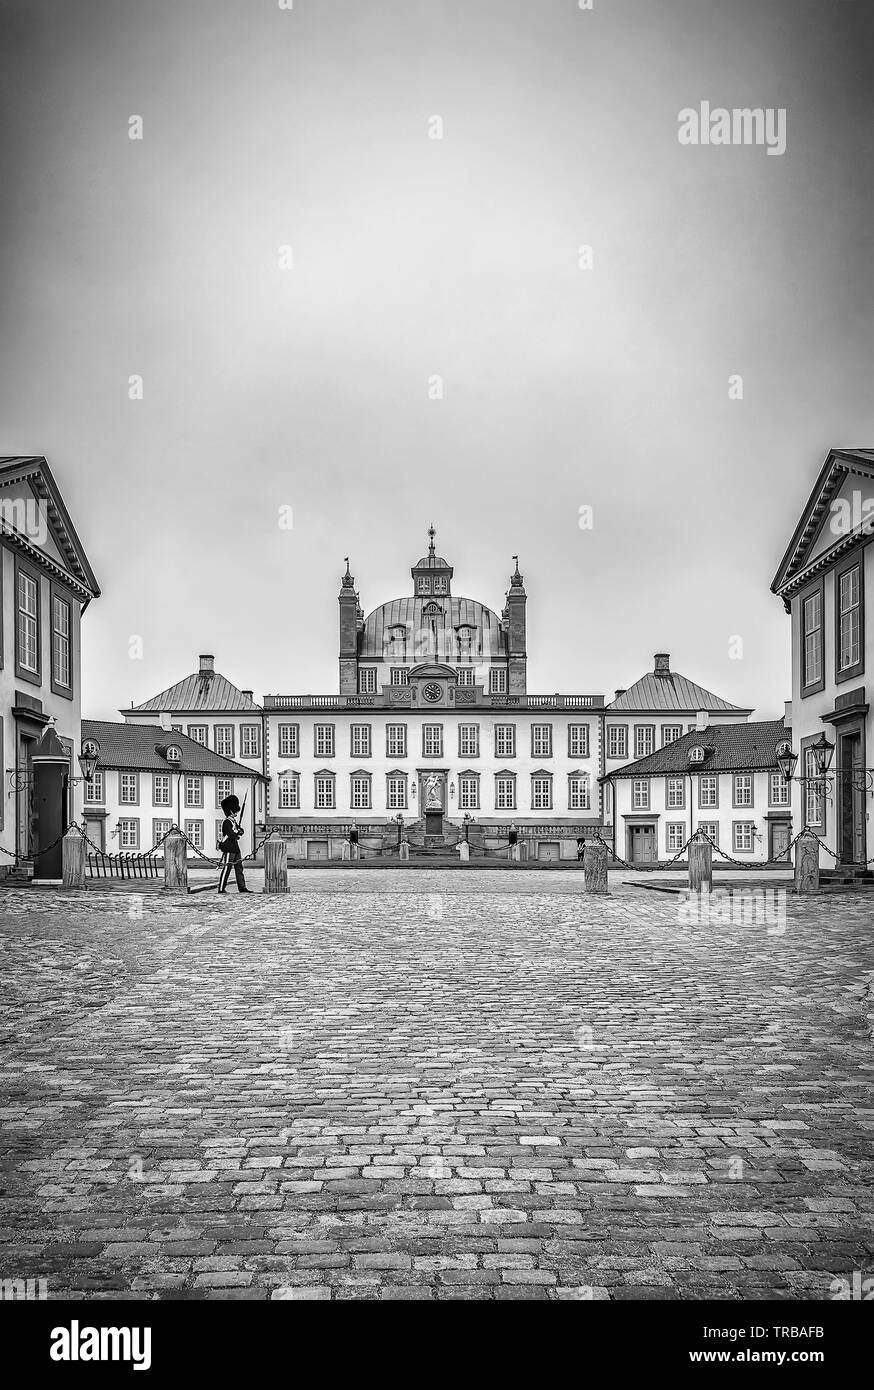 Fredensborg Slot High Resolution Stock Photography and Images - Alamy